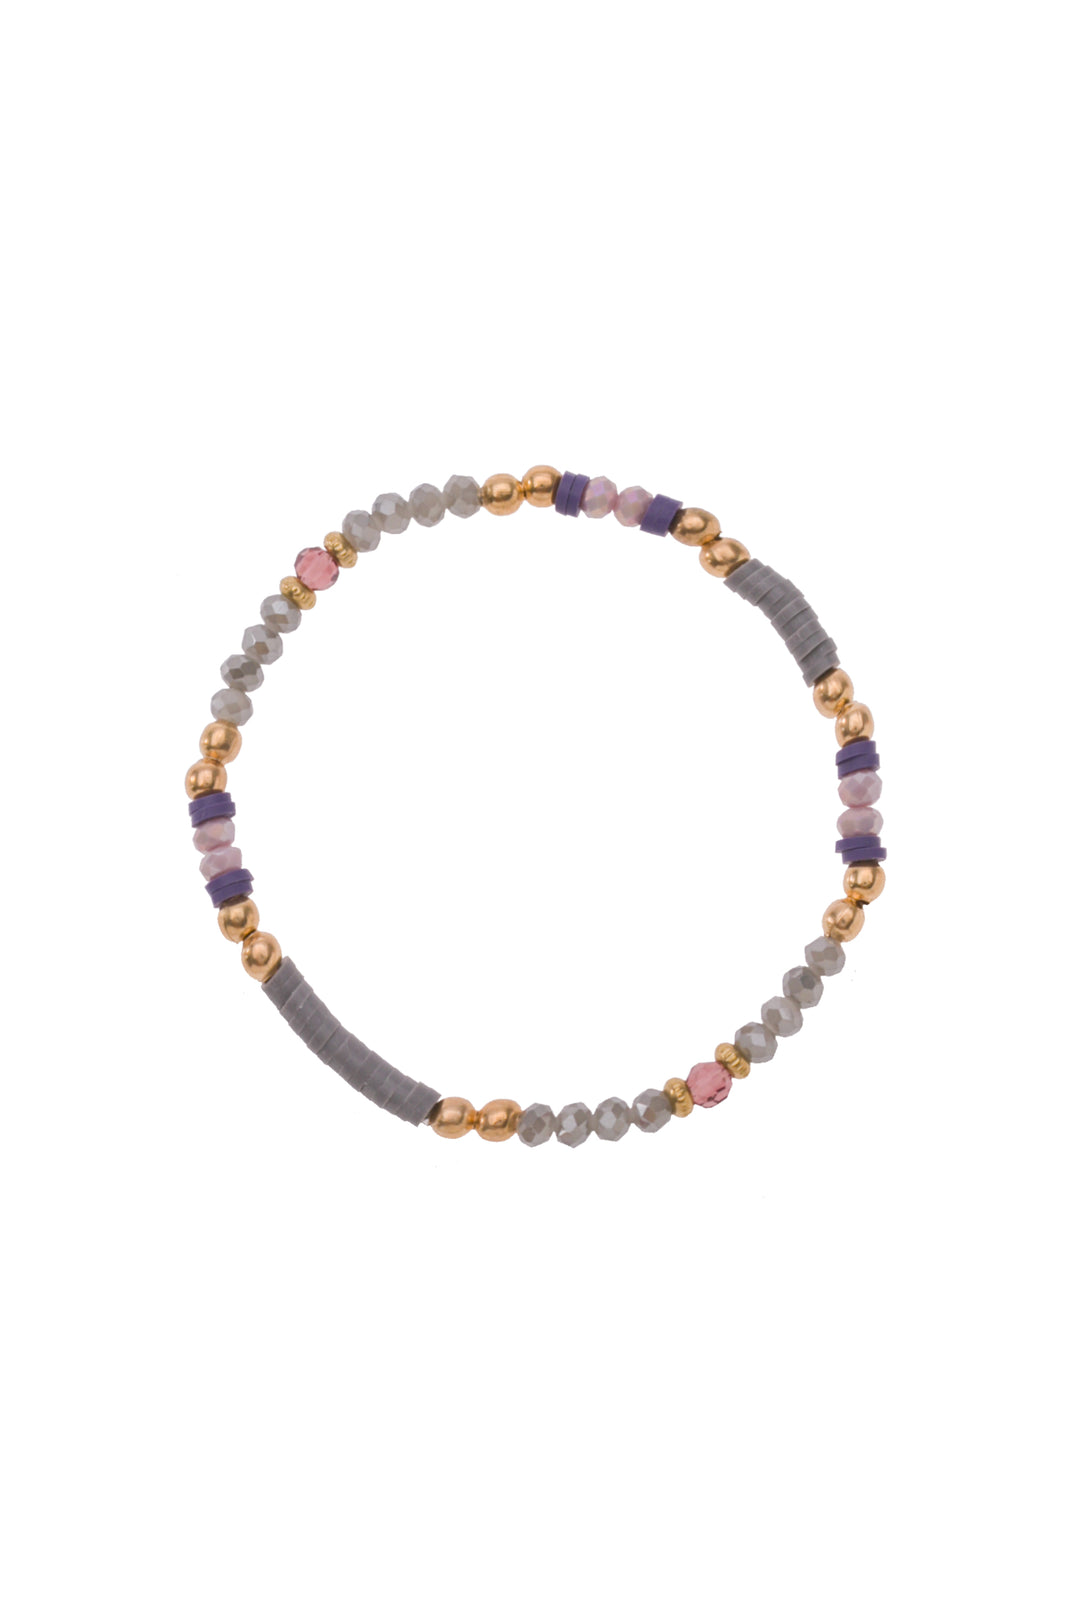 CRYSTAL AND METAL BEAD STRETCHY BRACELET - Kingfisher Road - Online Boutique